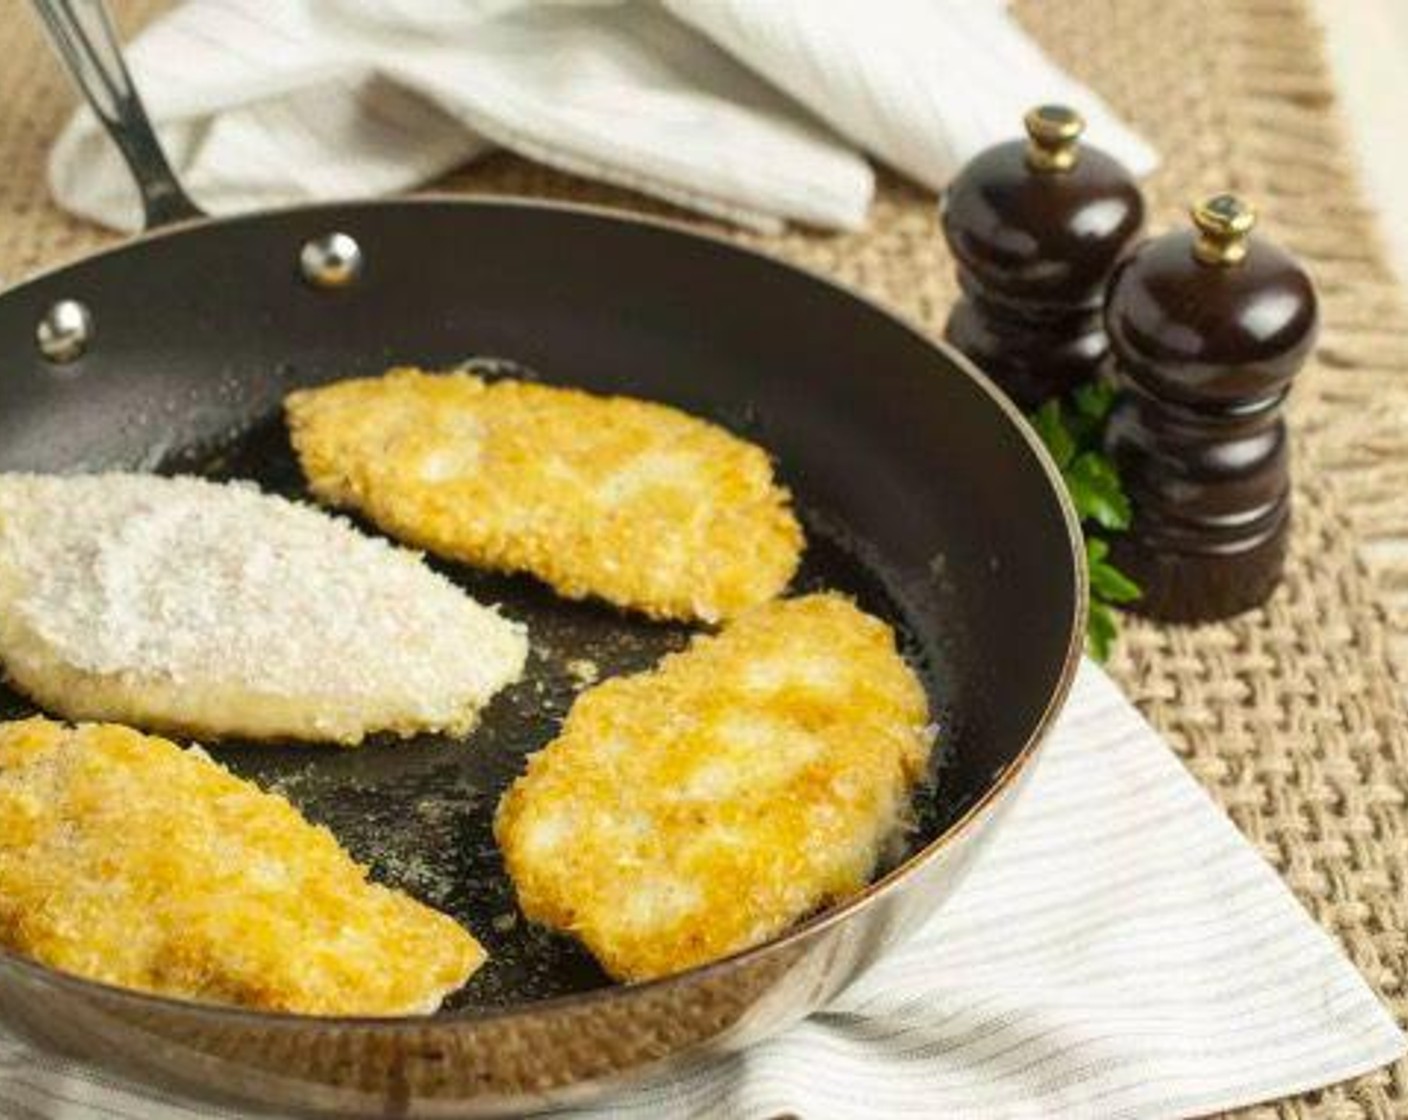 step 4 Dunk one fish fillet into eggs to coat evenly, then place into potato flakes. Flip to coat evenly on both sides. Add to hot pan and repeat with remaining fish fillets. Pan fry for 2-3 minutes on each side, or until golden.